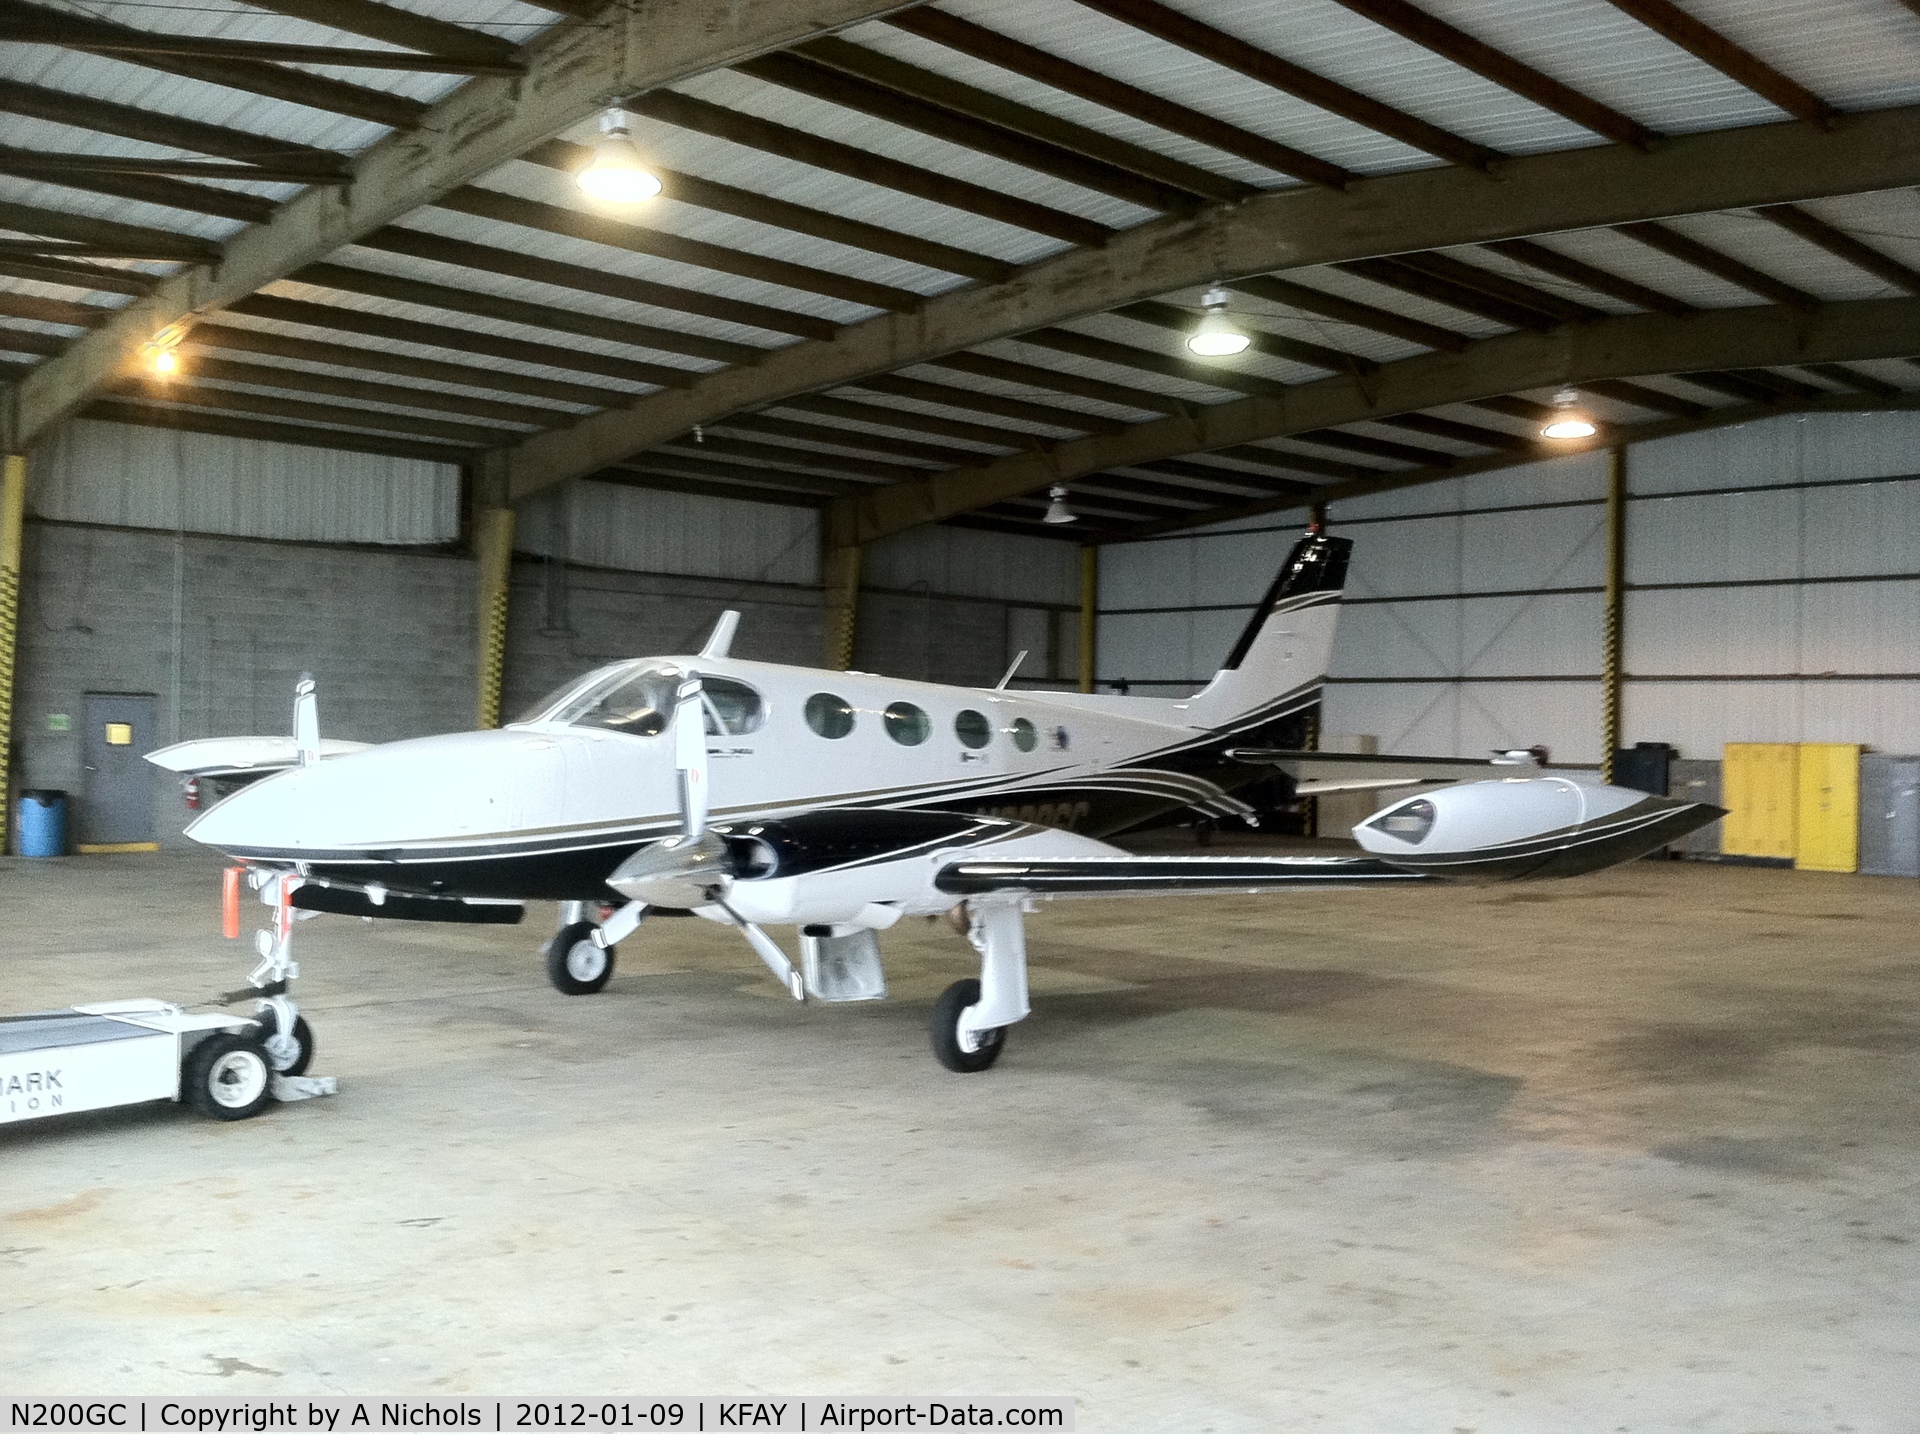 N200GC, 1978 Cessna 340A C/N 340A0503, At Home in FAY